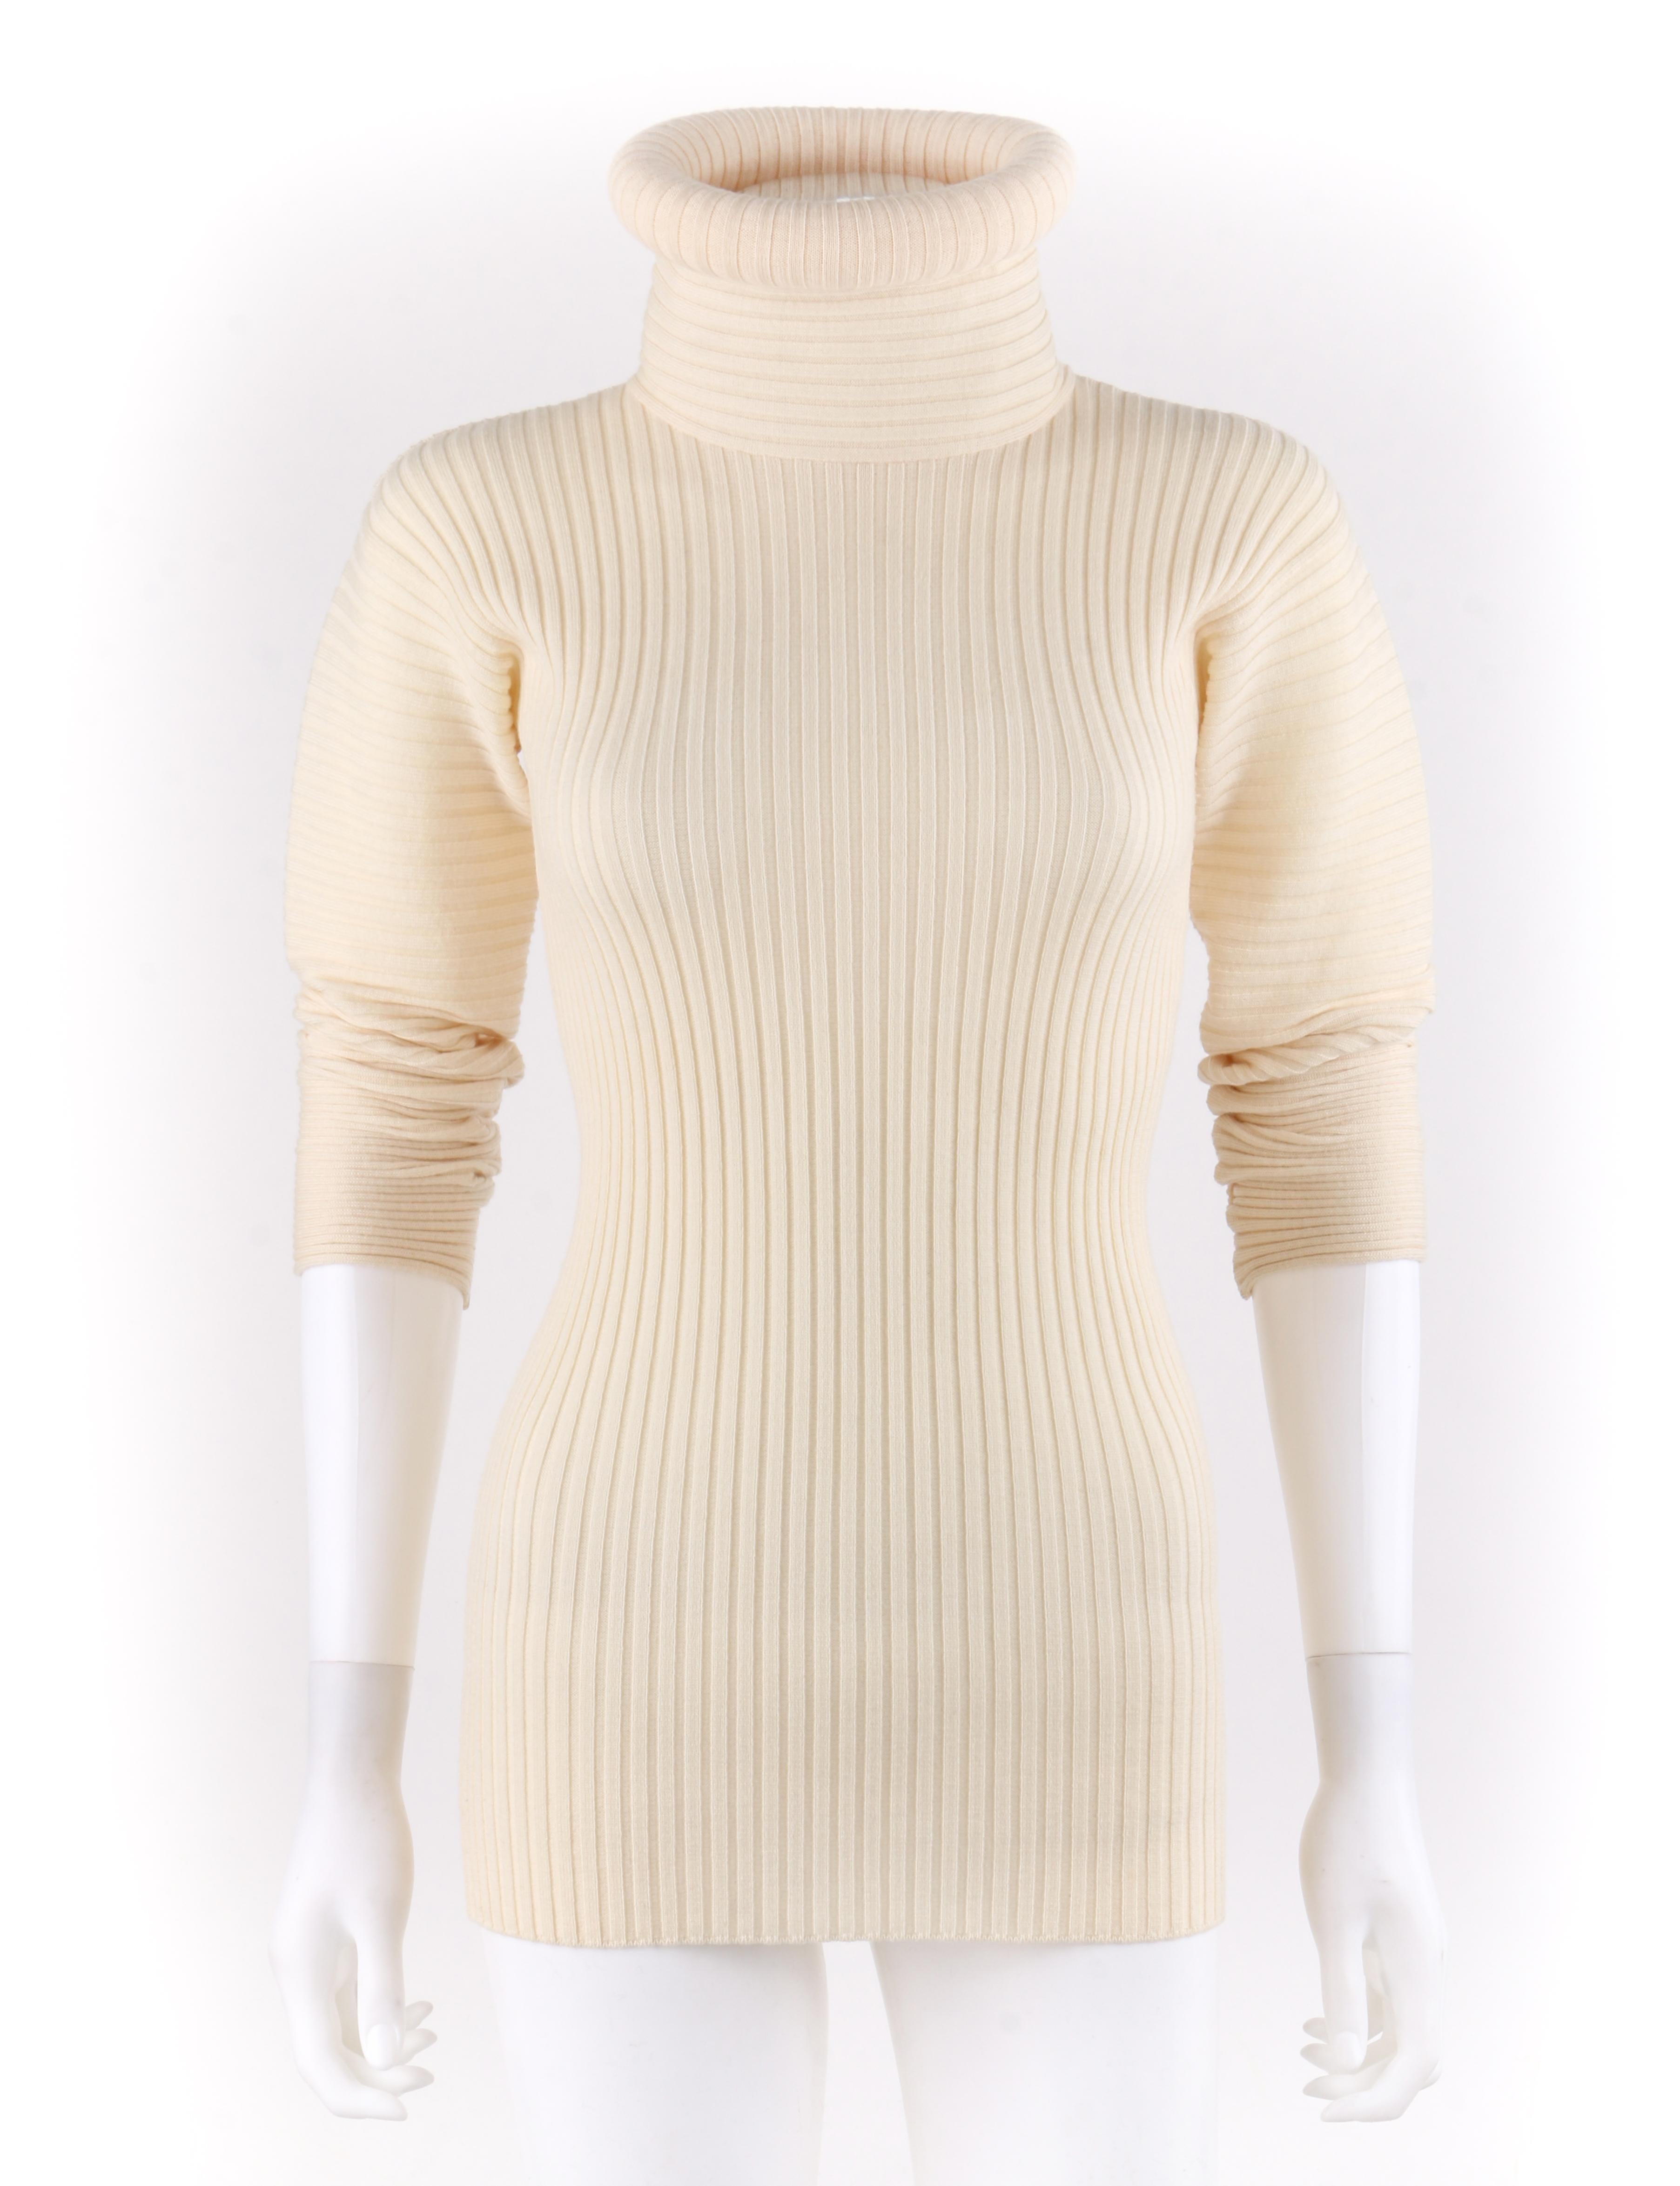 JEAN PAUL GAULTIER Mailie c.1990’s Ivory Tube Turtleneck Ribbed Knit Wool Sweater
 
Circa: 1990’s
Label(s): Jean Paul Gaultier / Maile   
Style: Sweater
Color(s): Ivory 
Lined: No
Marked Fabric Content: 100% Wool 
Additional Details / Inclusions: